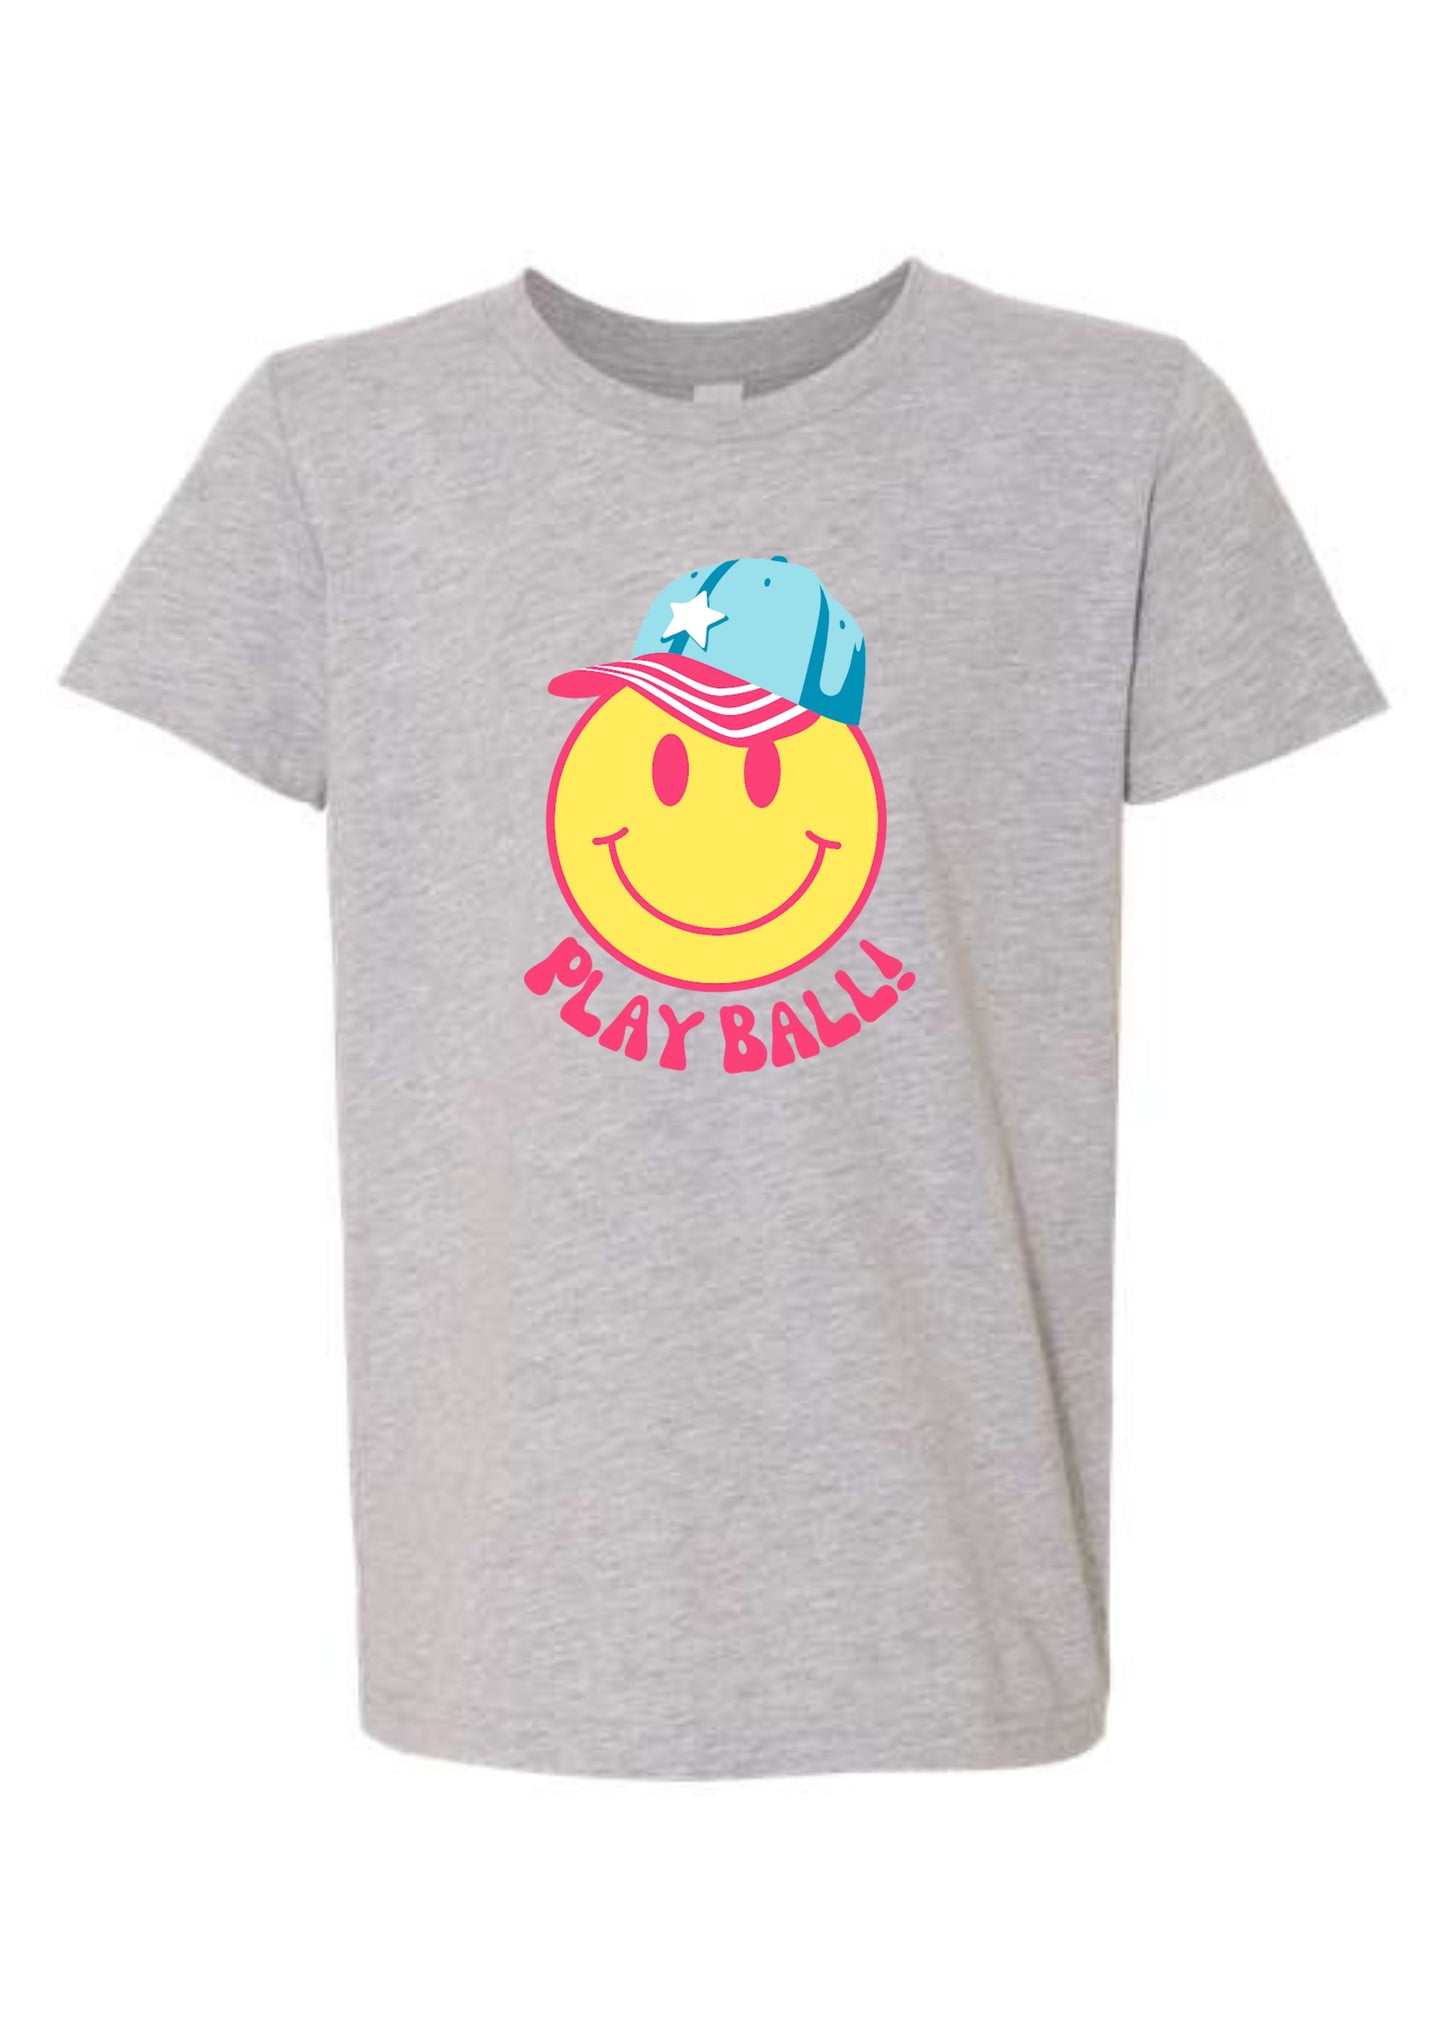 Play Ball Happy | Tee | Kids-Kids Tees-Sister Shirts-Sister Shirts, Cute & Custom Tees for Mama & Littles in Trussville, Alabama.